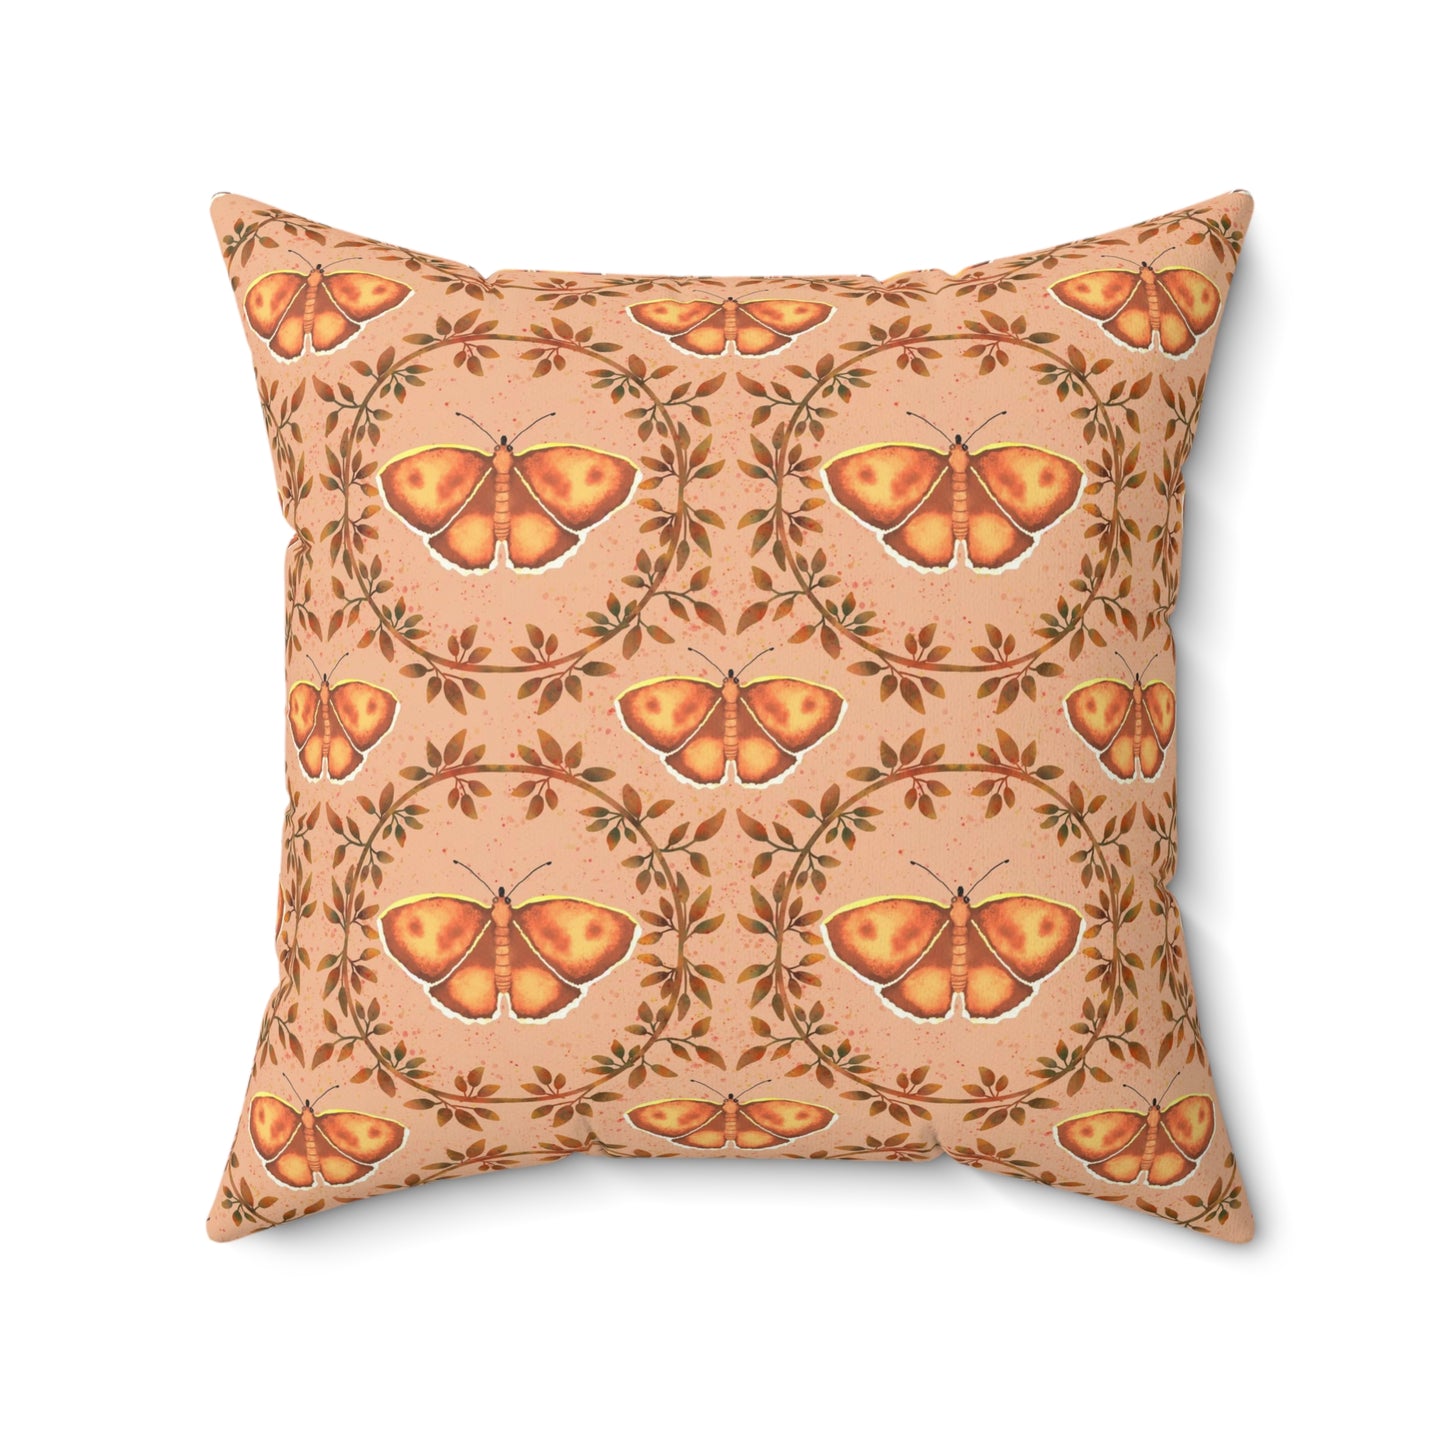 Moths and Vines Spun Polyester Square Pillow